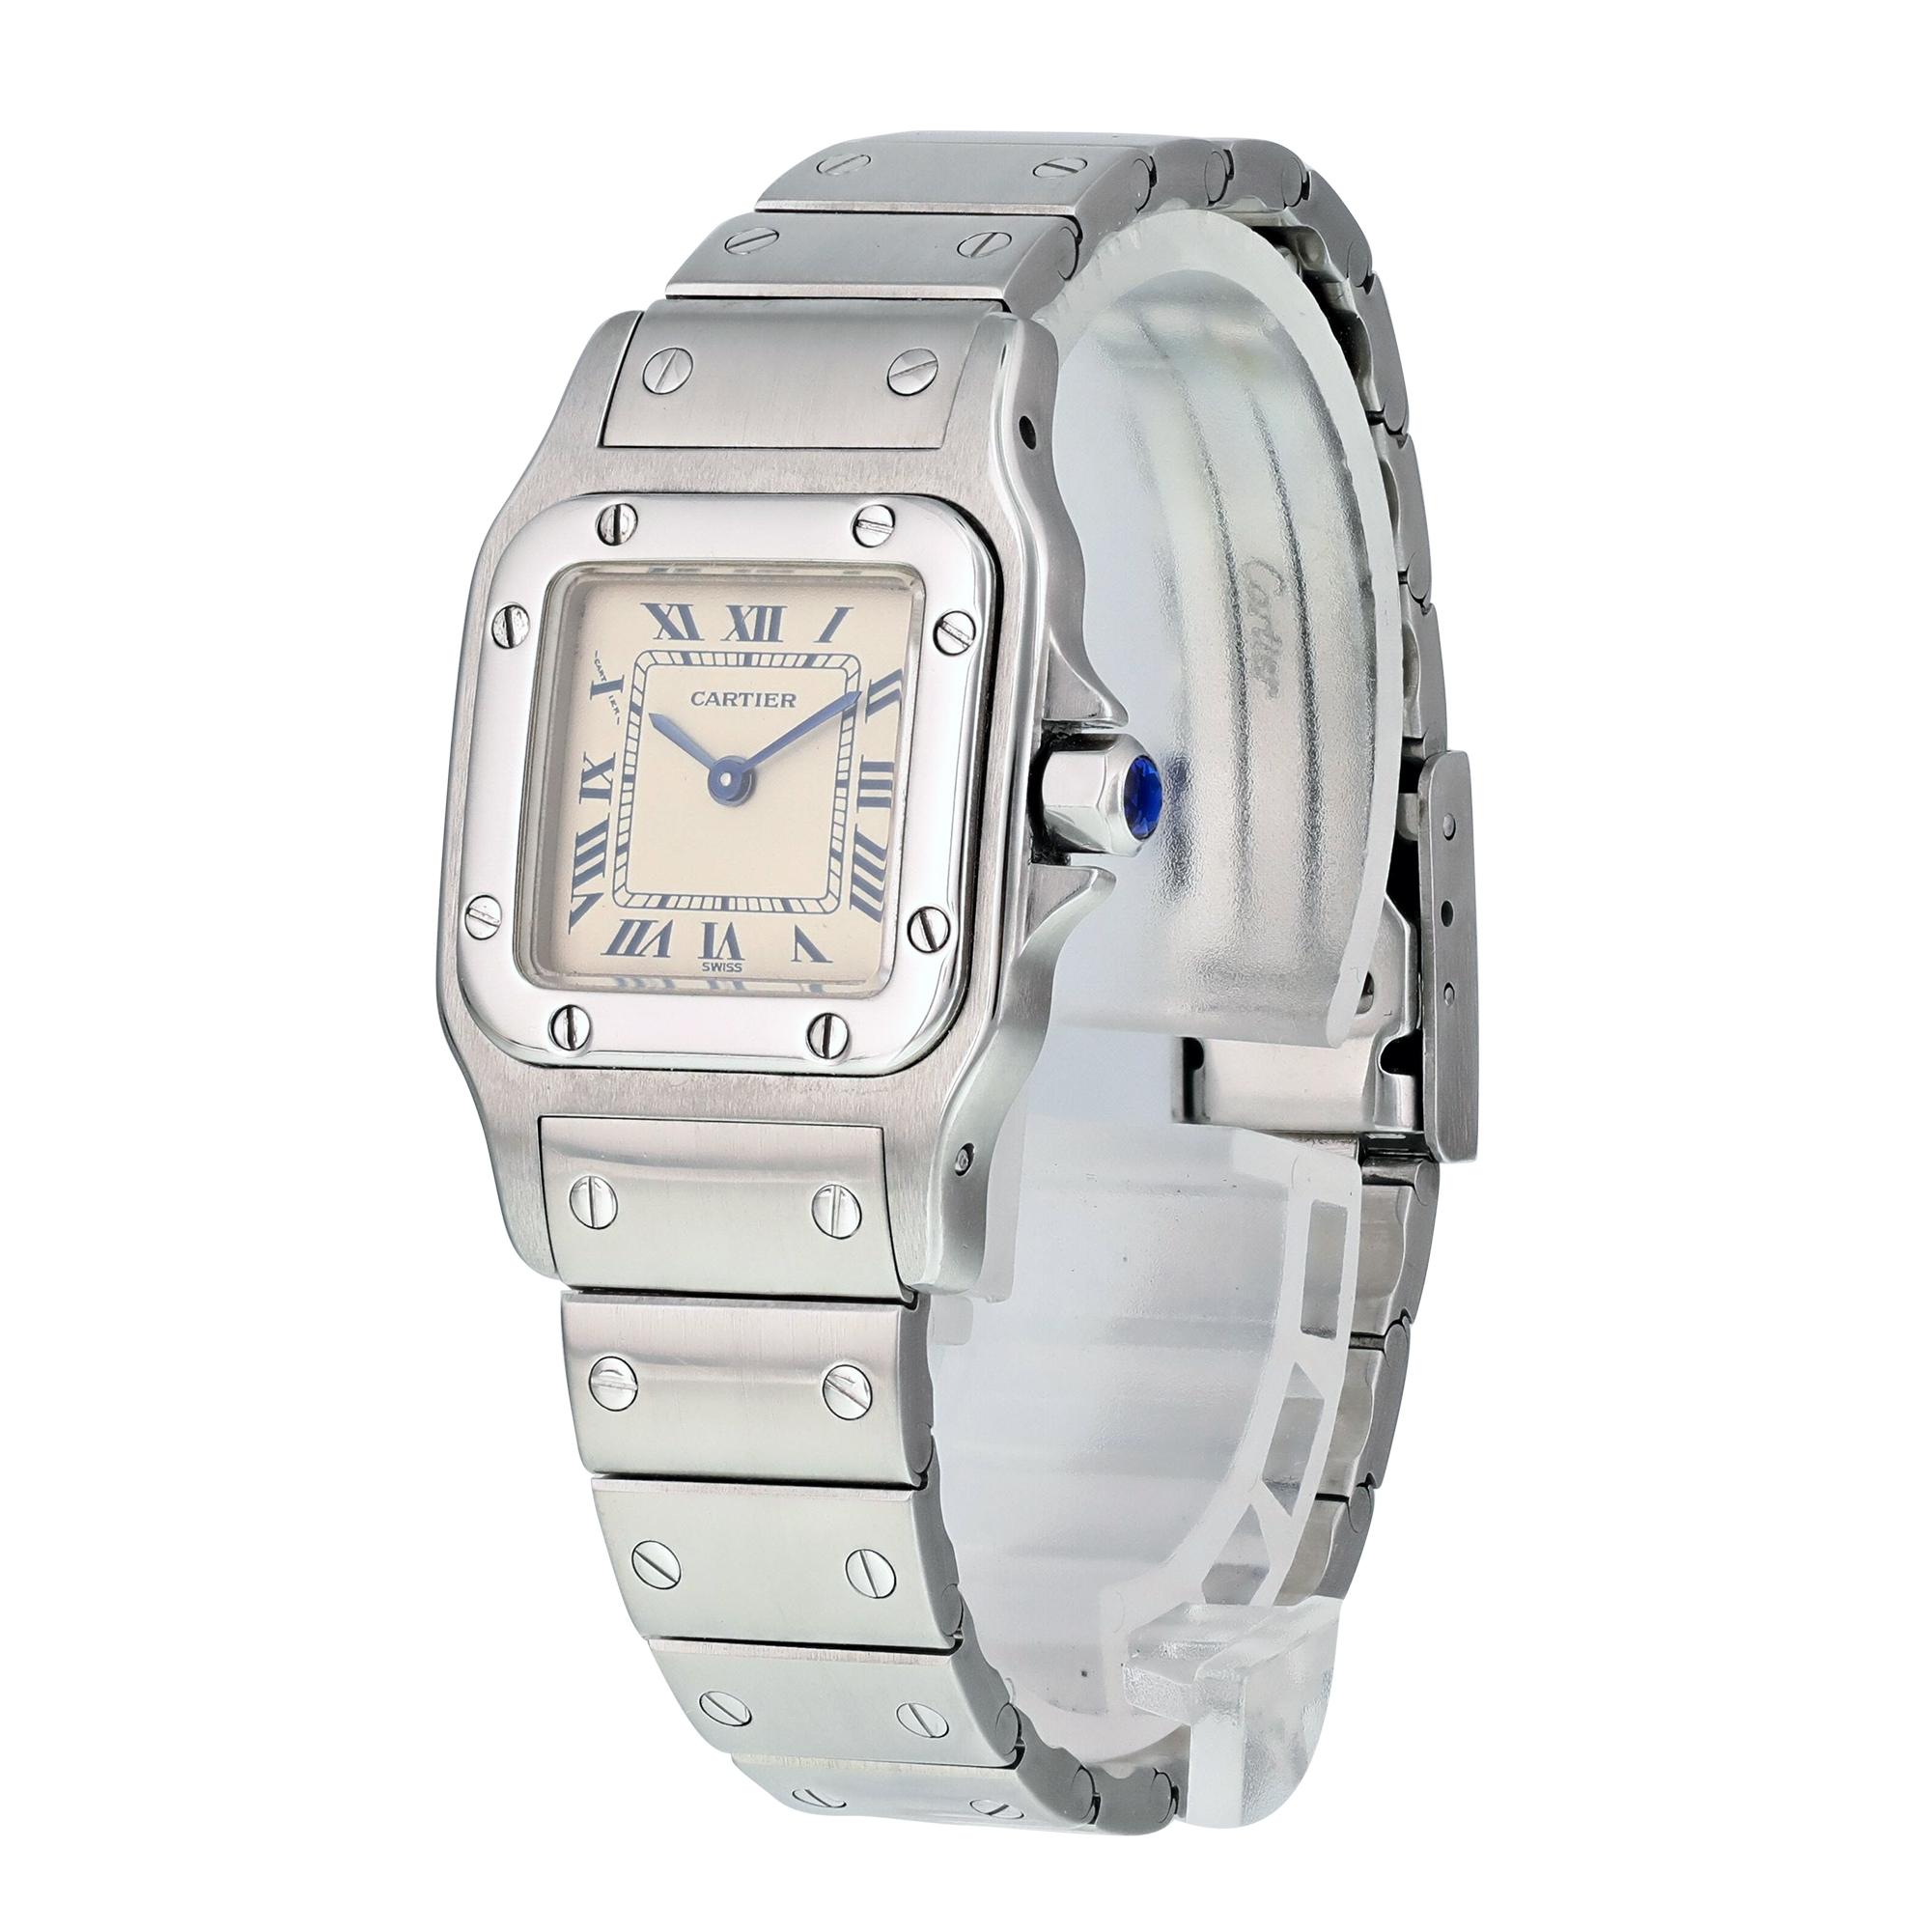 Cartier Santos Galbee 9057930 Ladies Watch.
24mm Stainless Steel case. 
Stainless Steel Stationary bezel. 
White dial with blue steel hands and index hour markers. 
Minute markers on the outer dial. 
Stainless Steel Stainless Steel with Fold Over